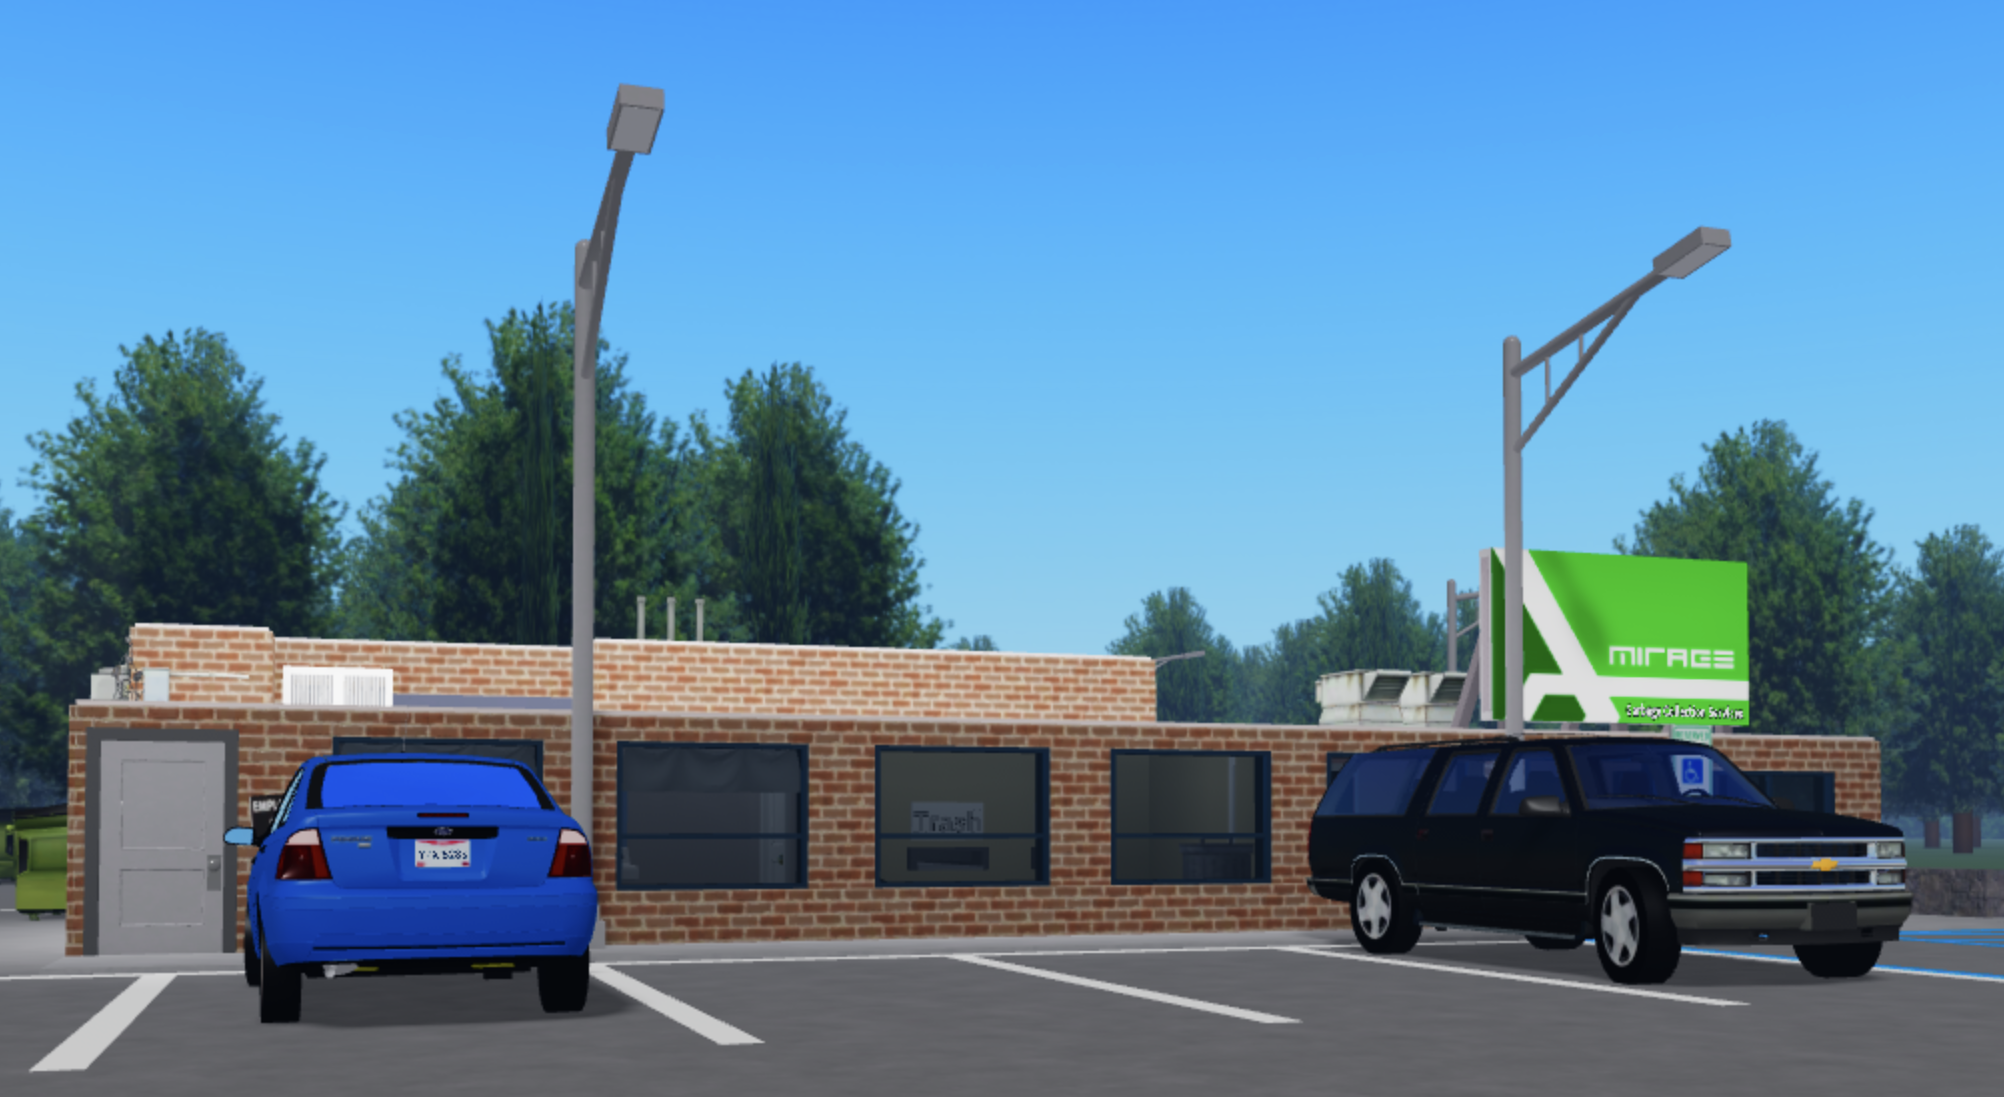 Southwest Ohio Roleplay - Roblox